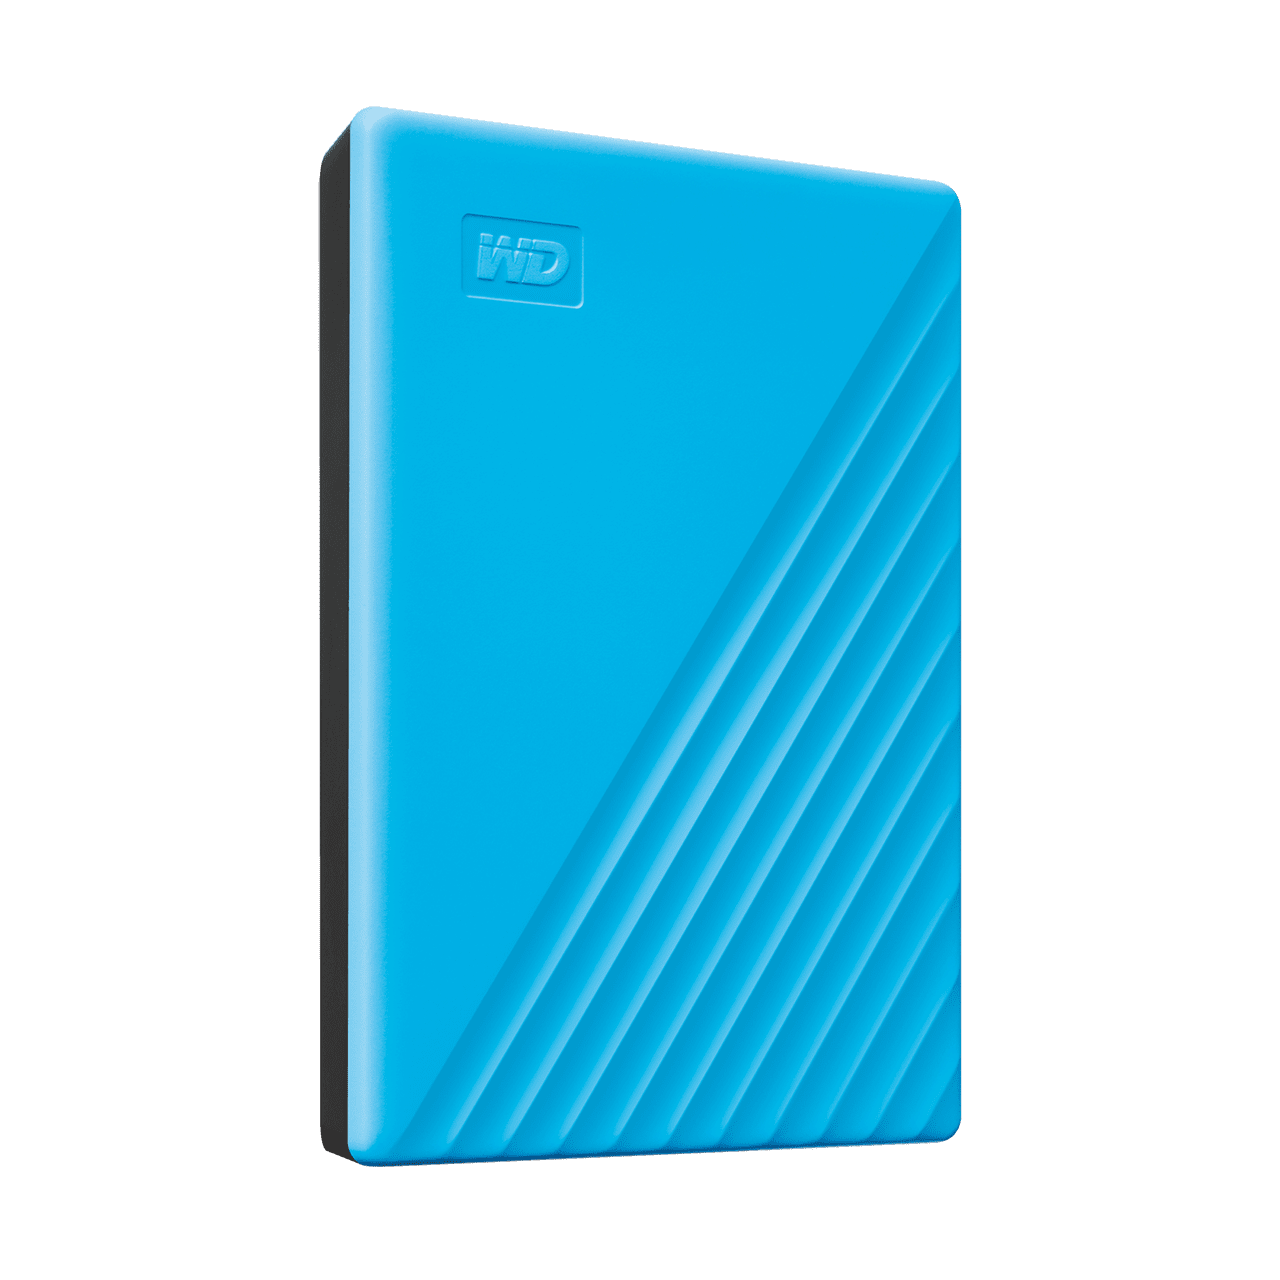 WD Western Digital My Passport 1TB (Blue) Slim Portable External Hard Disk USB 3.0 With WD Backup Software & Password Protection